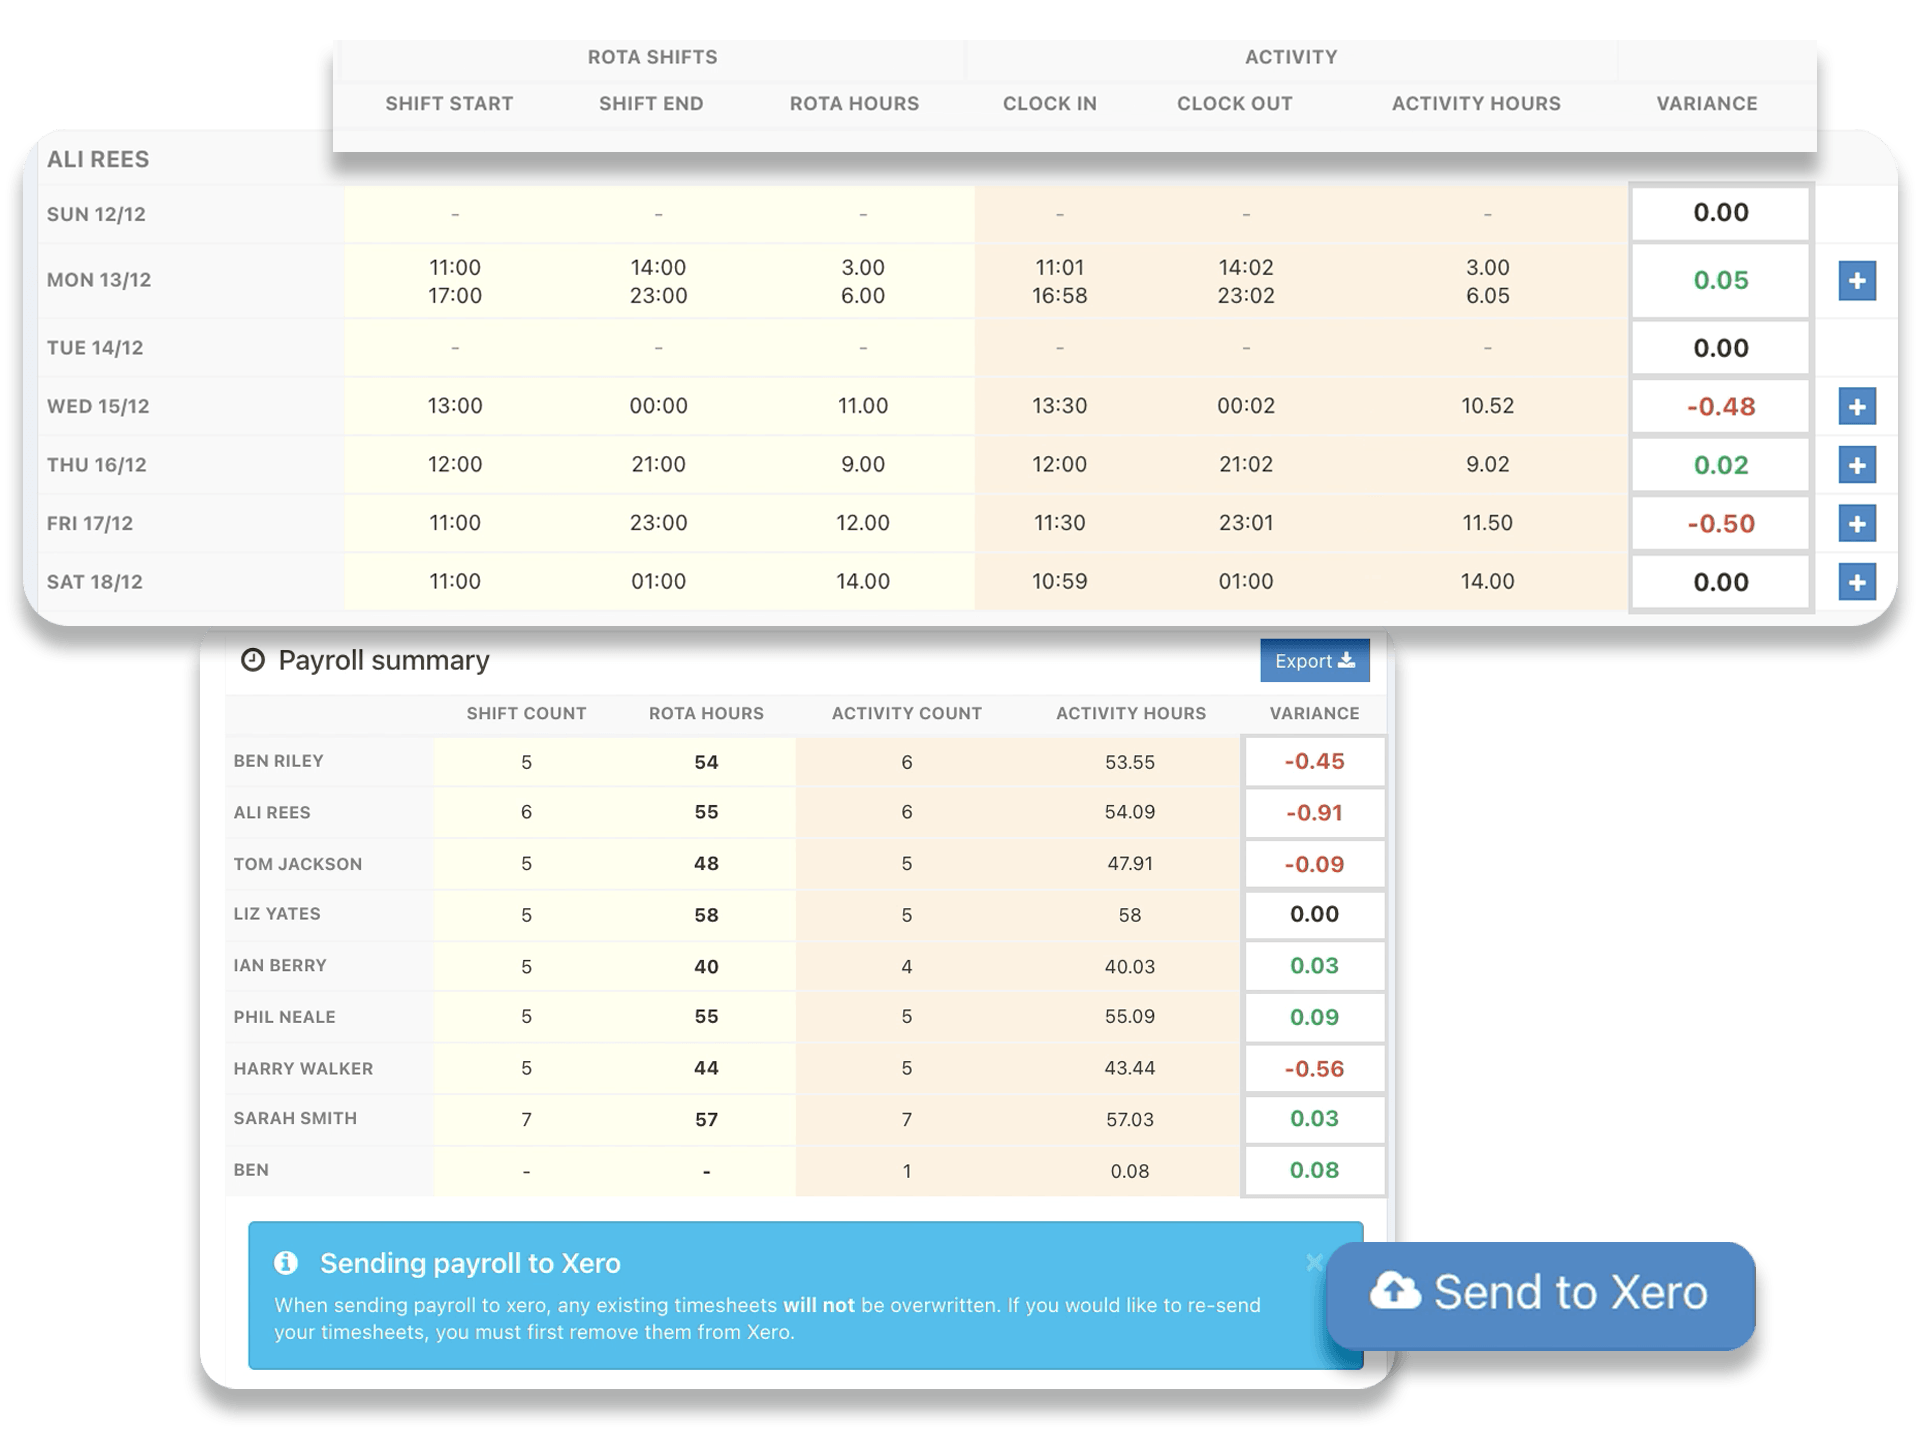 Confirm staff hours and export to Xero